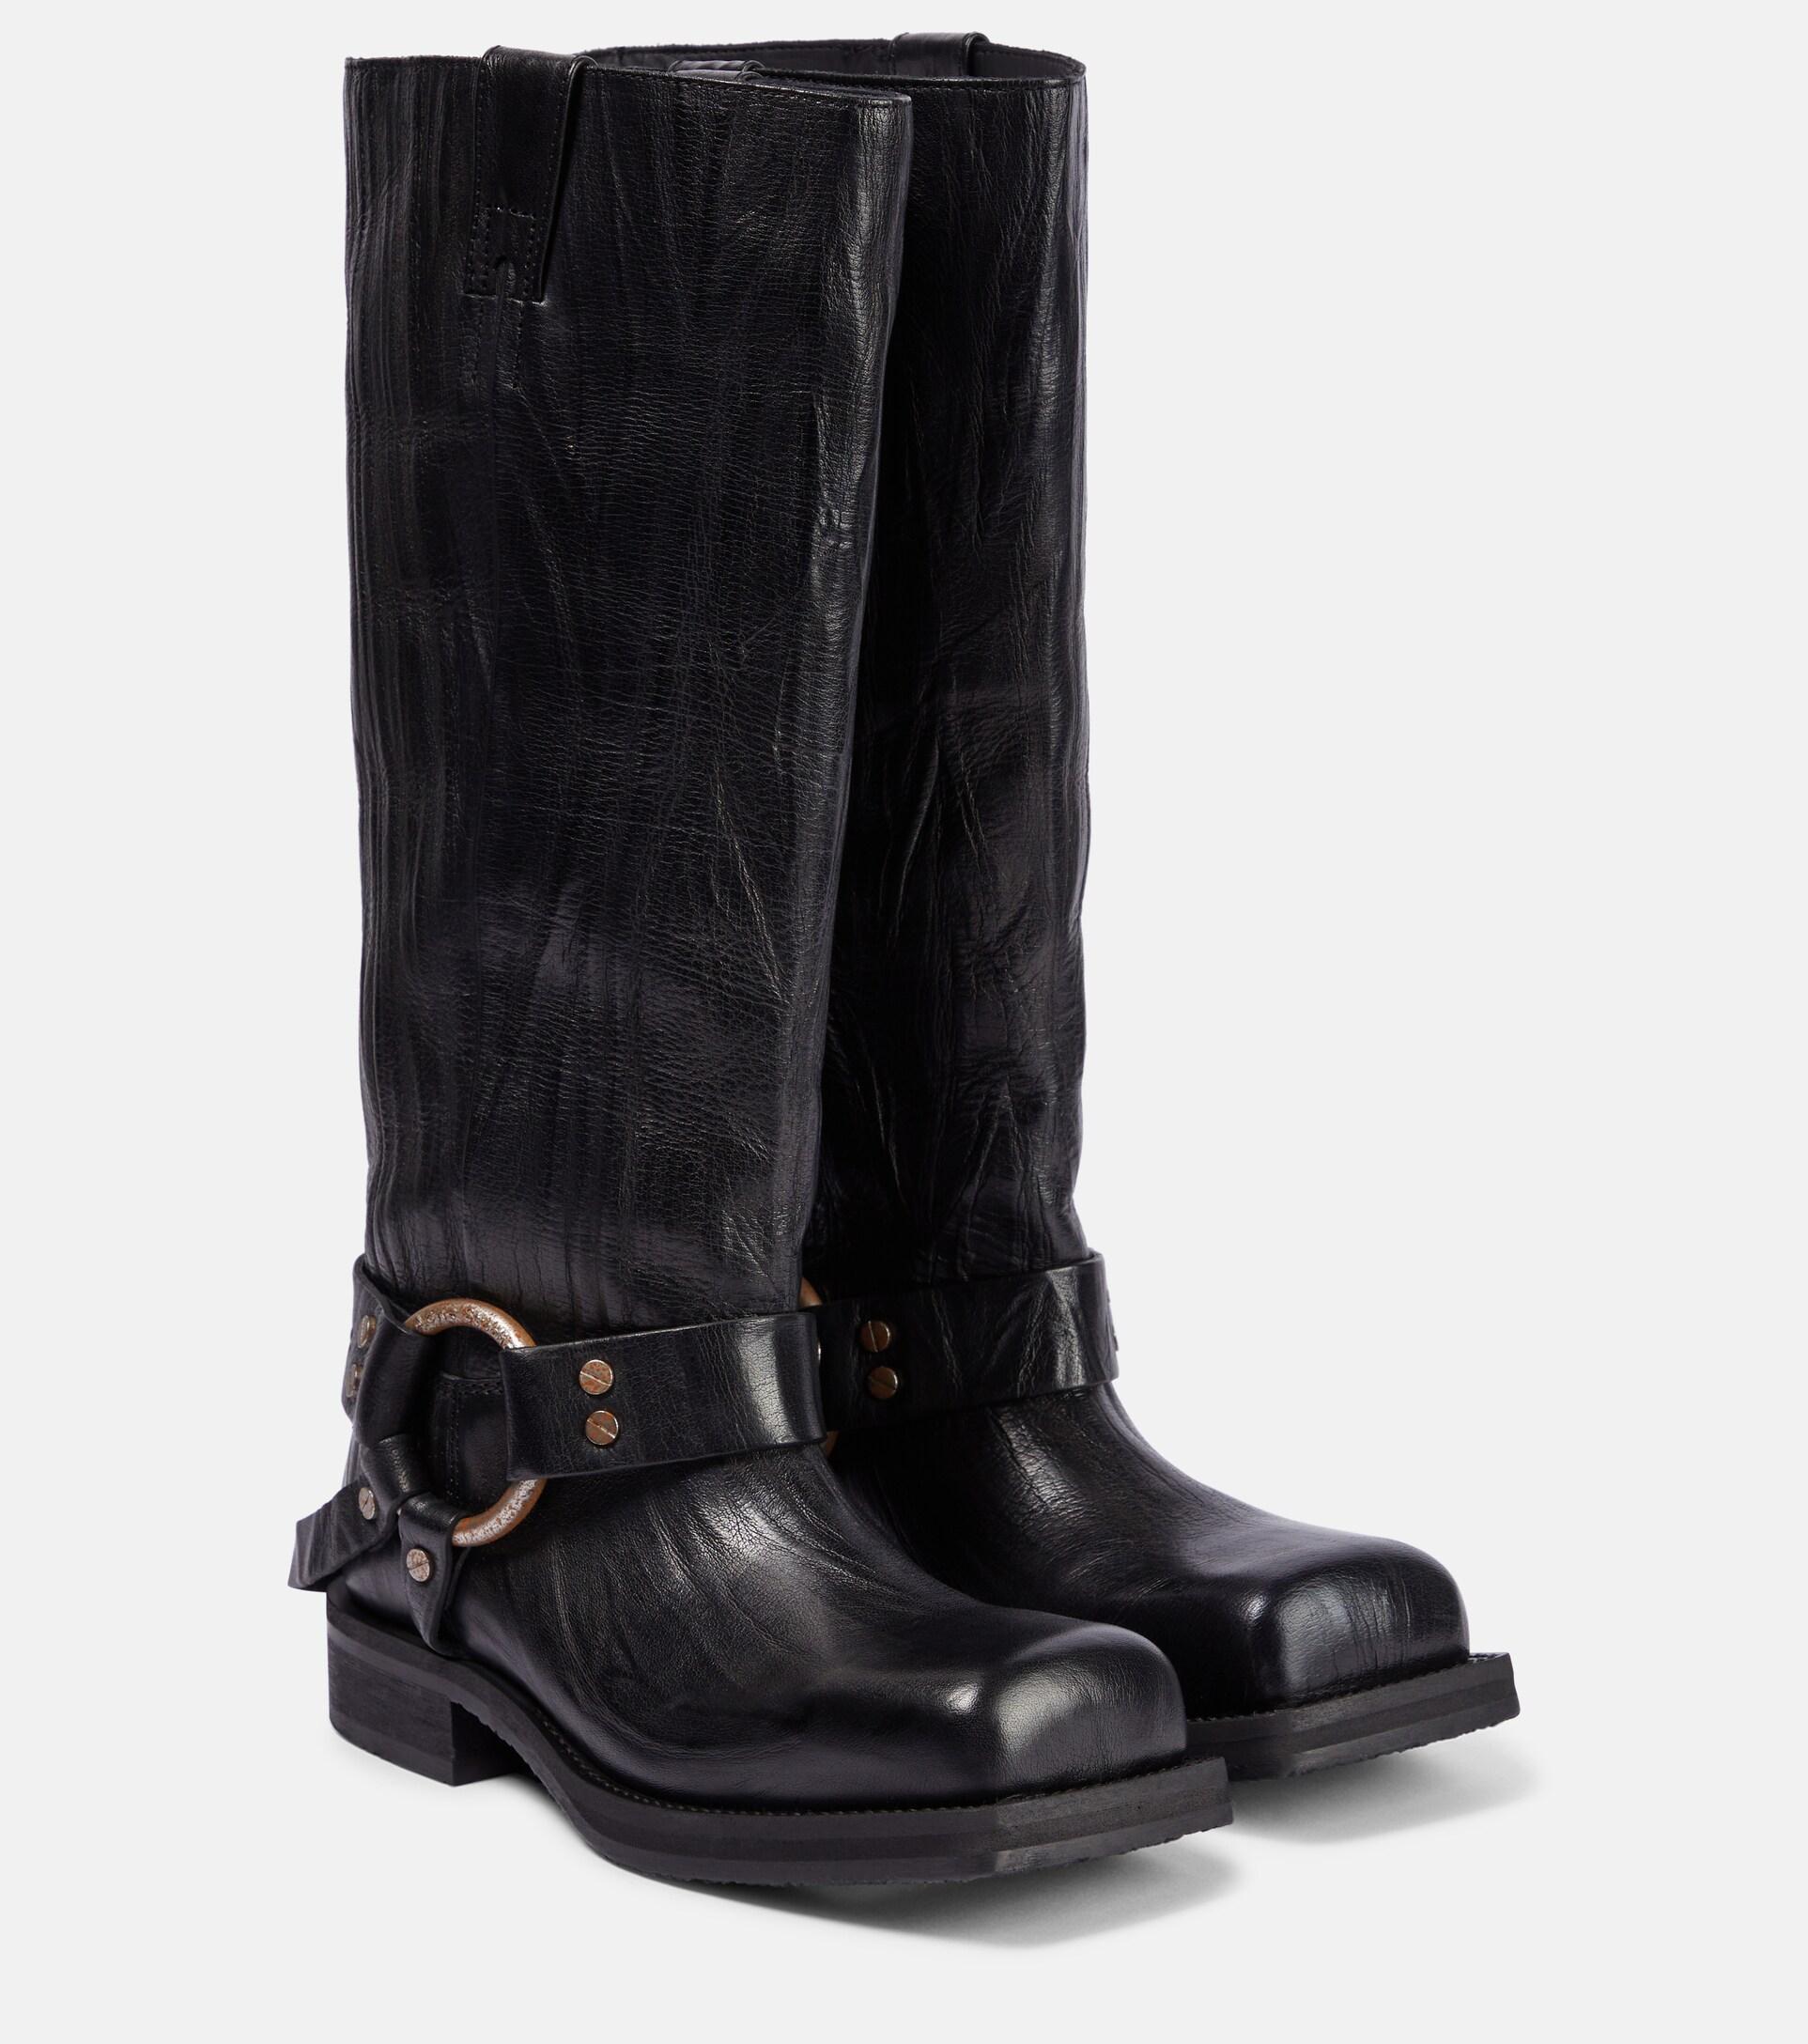 Acne Studios Balius Leather Knee-high Boots in Black | Lyst